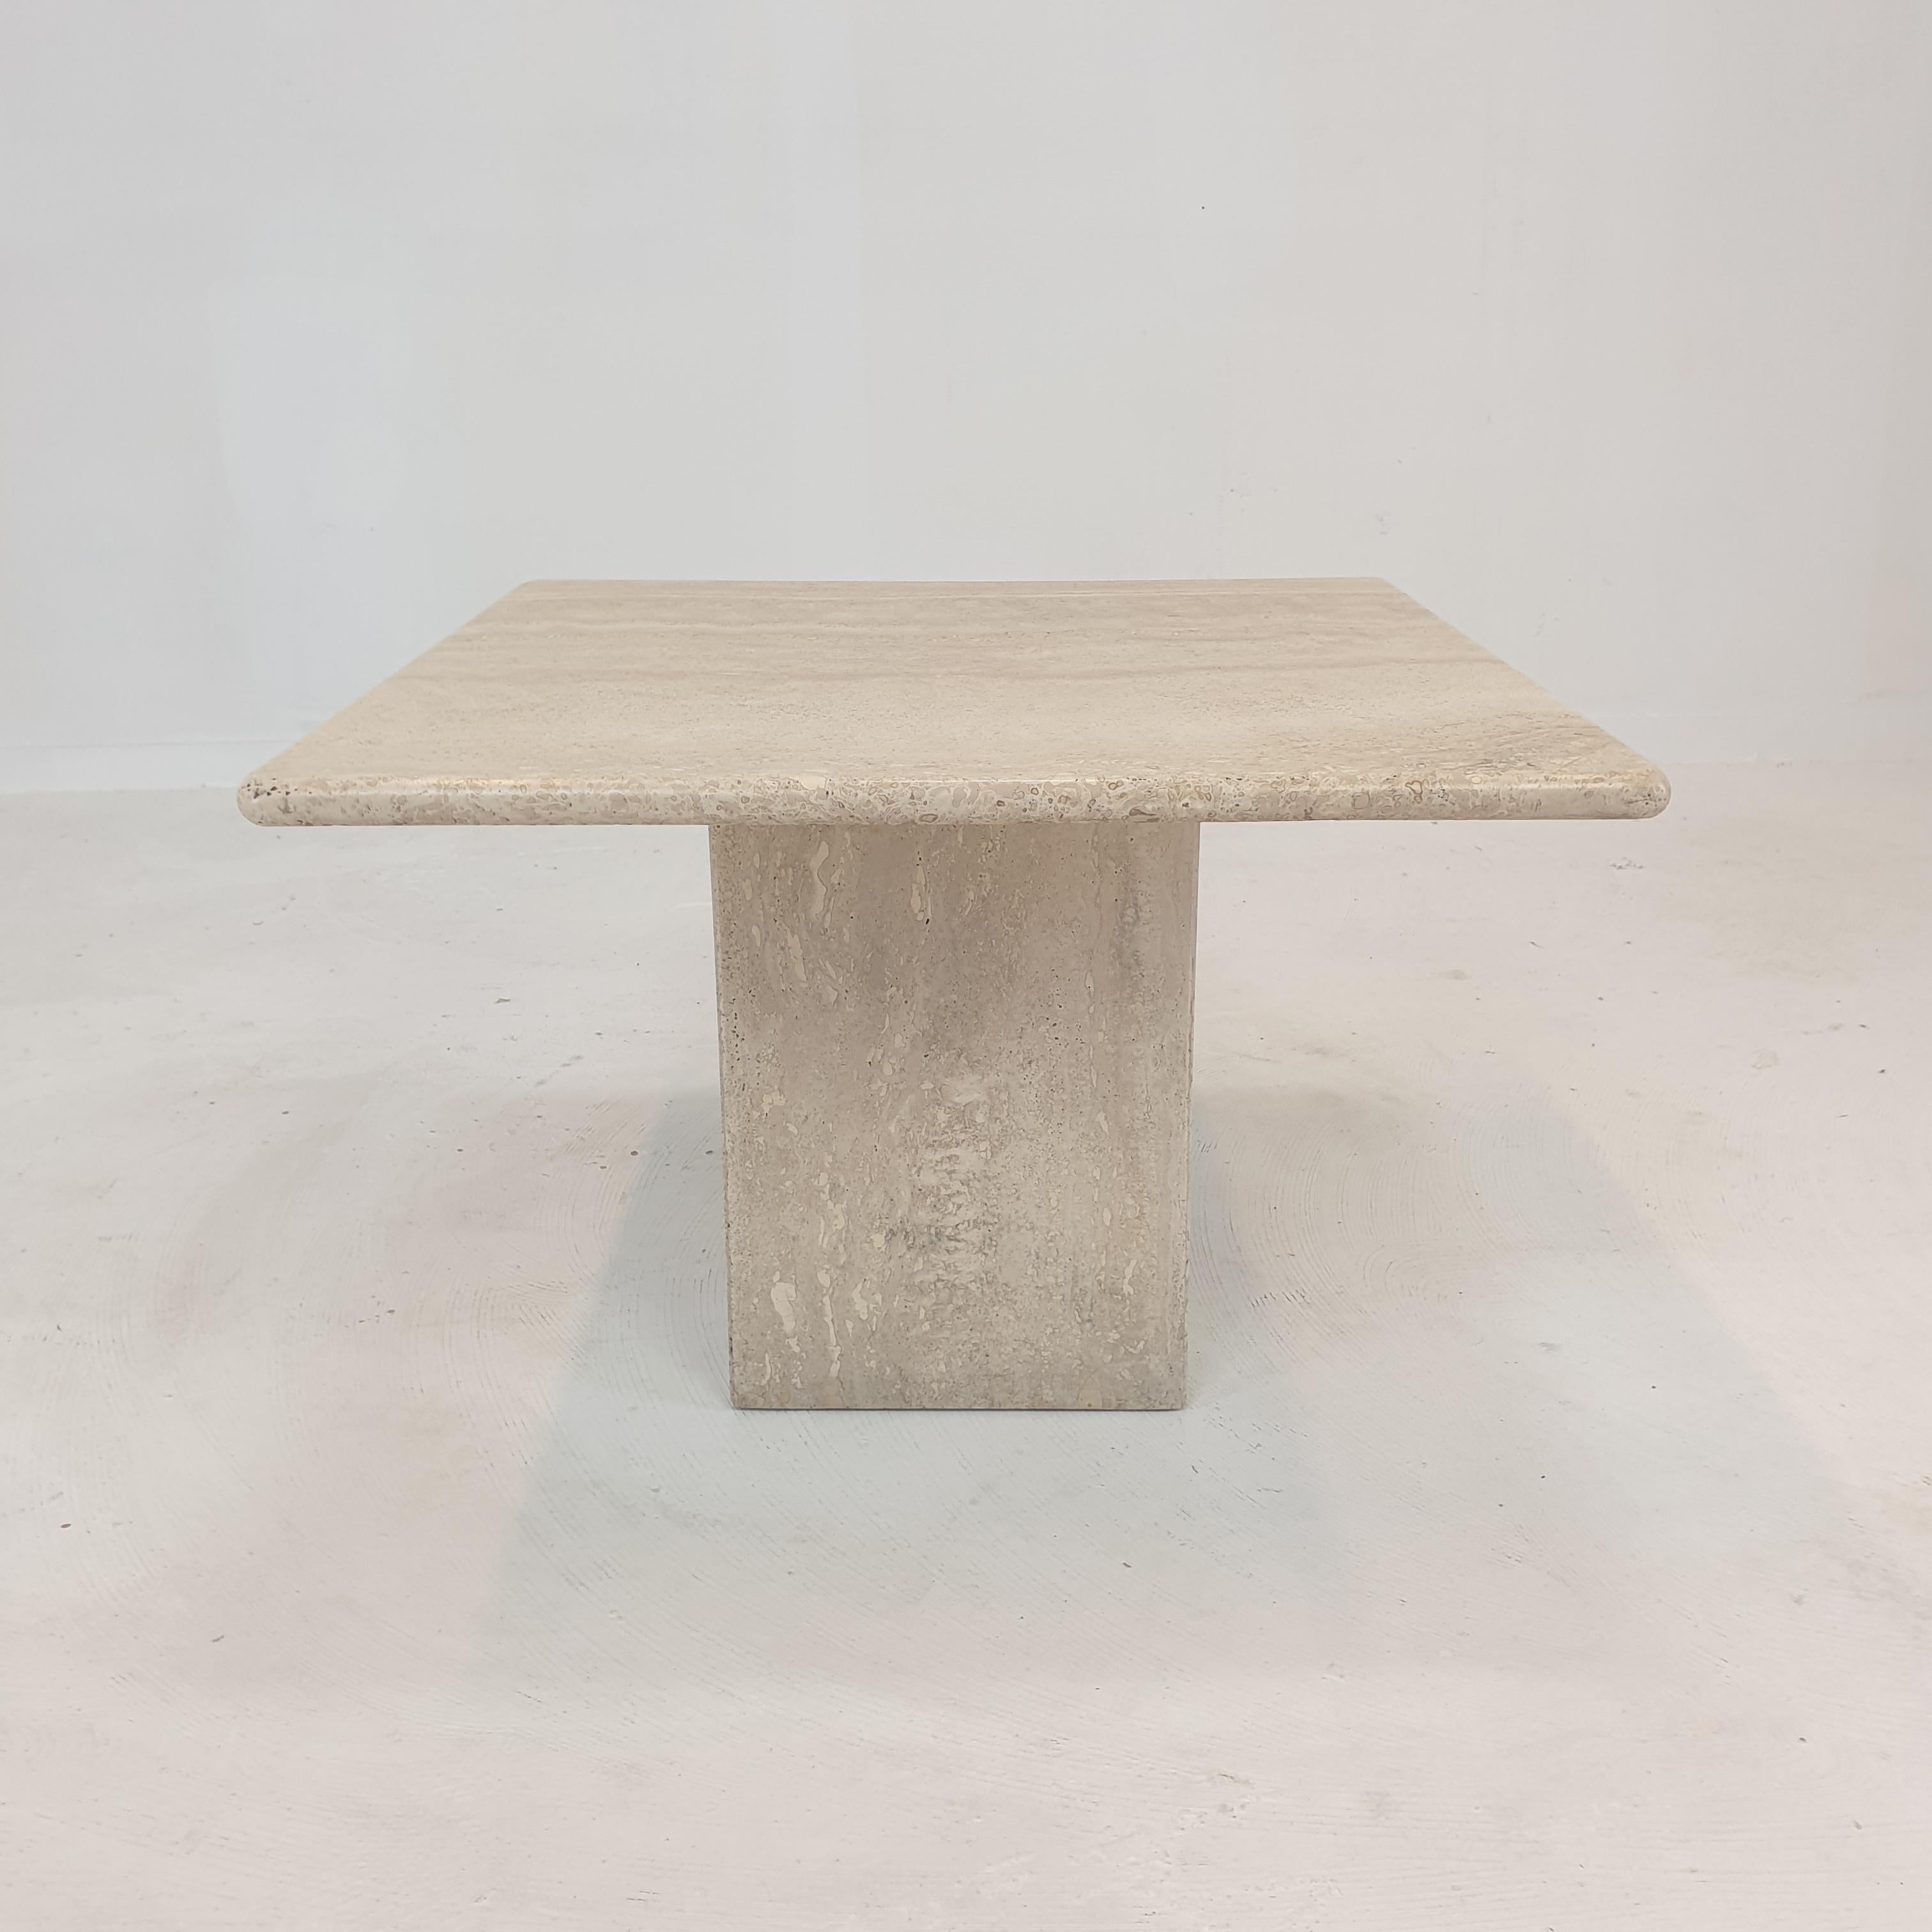 Late 20th Century Italian Travertine Coffee Table, 1980's For Sale